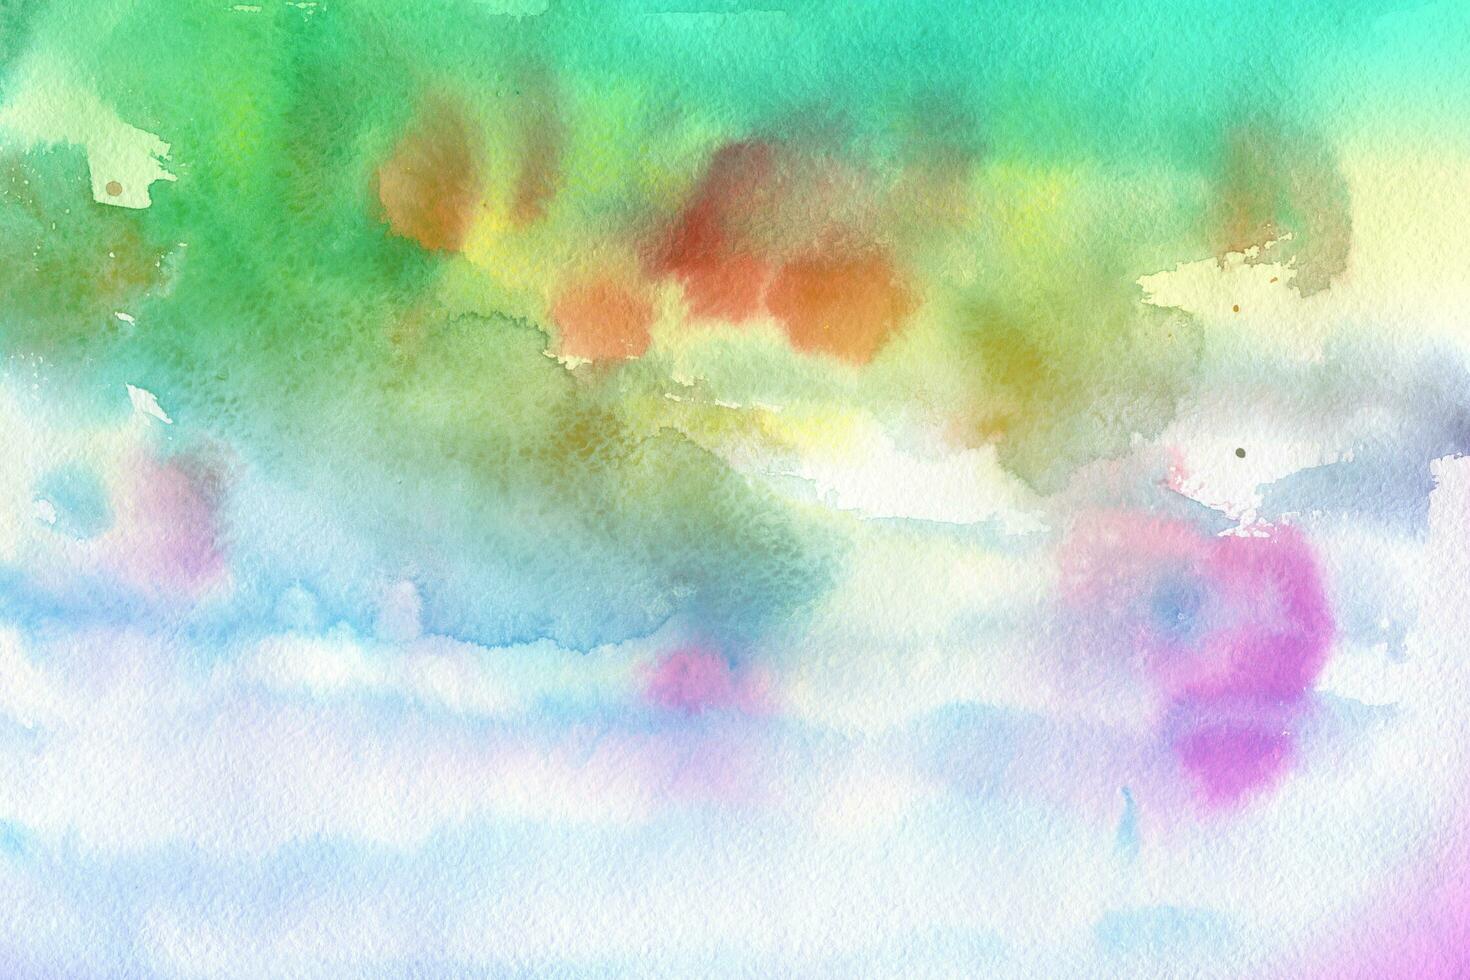 Elements handmade watercolor background photo